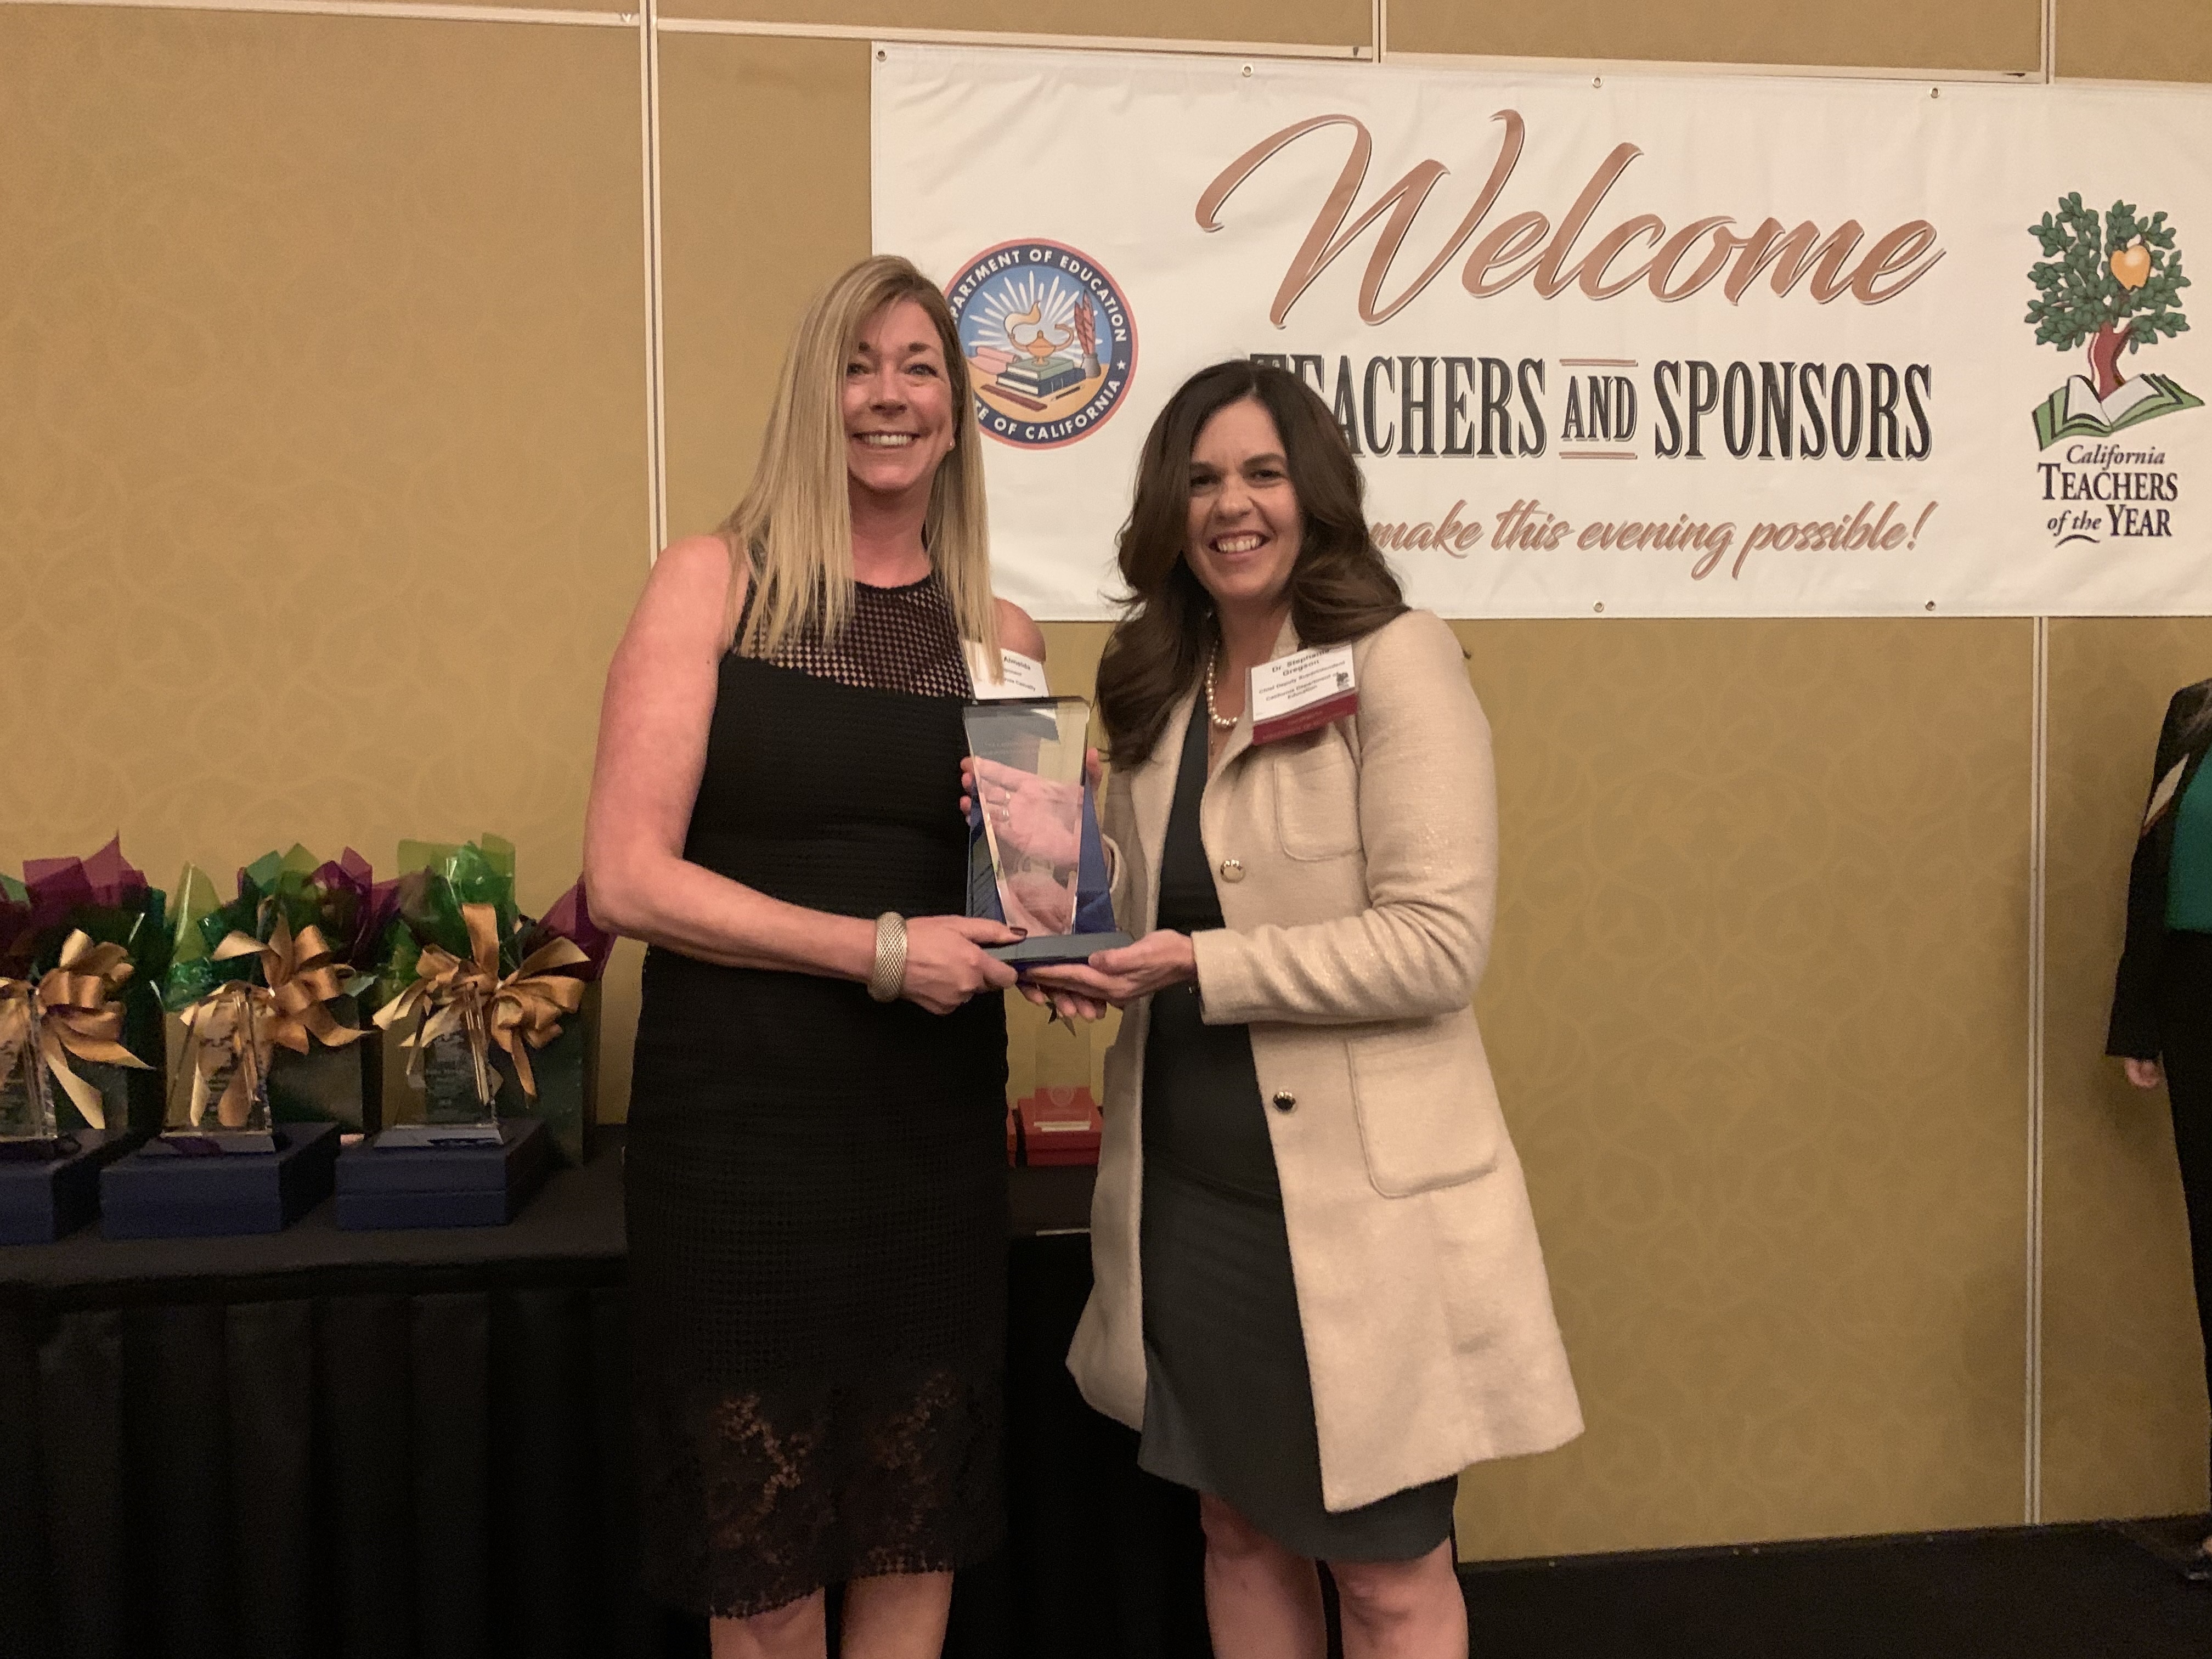 California Casualty Receives Appreciation Award at Teachers of the Year Gala